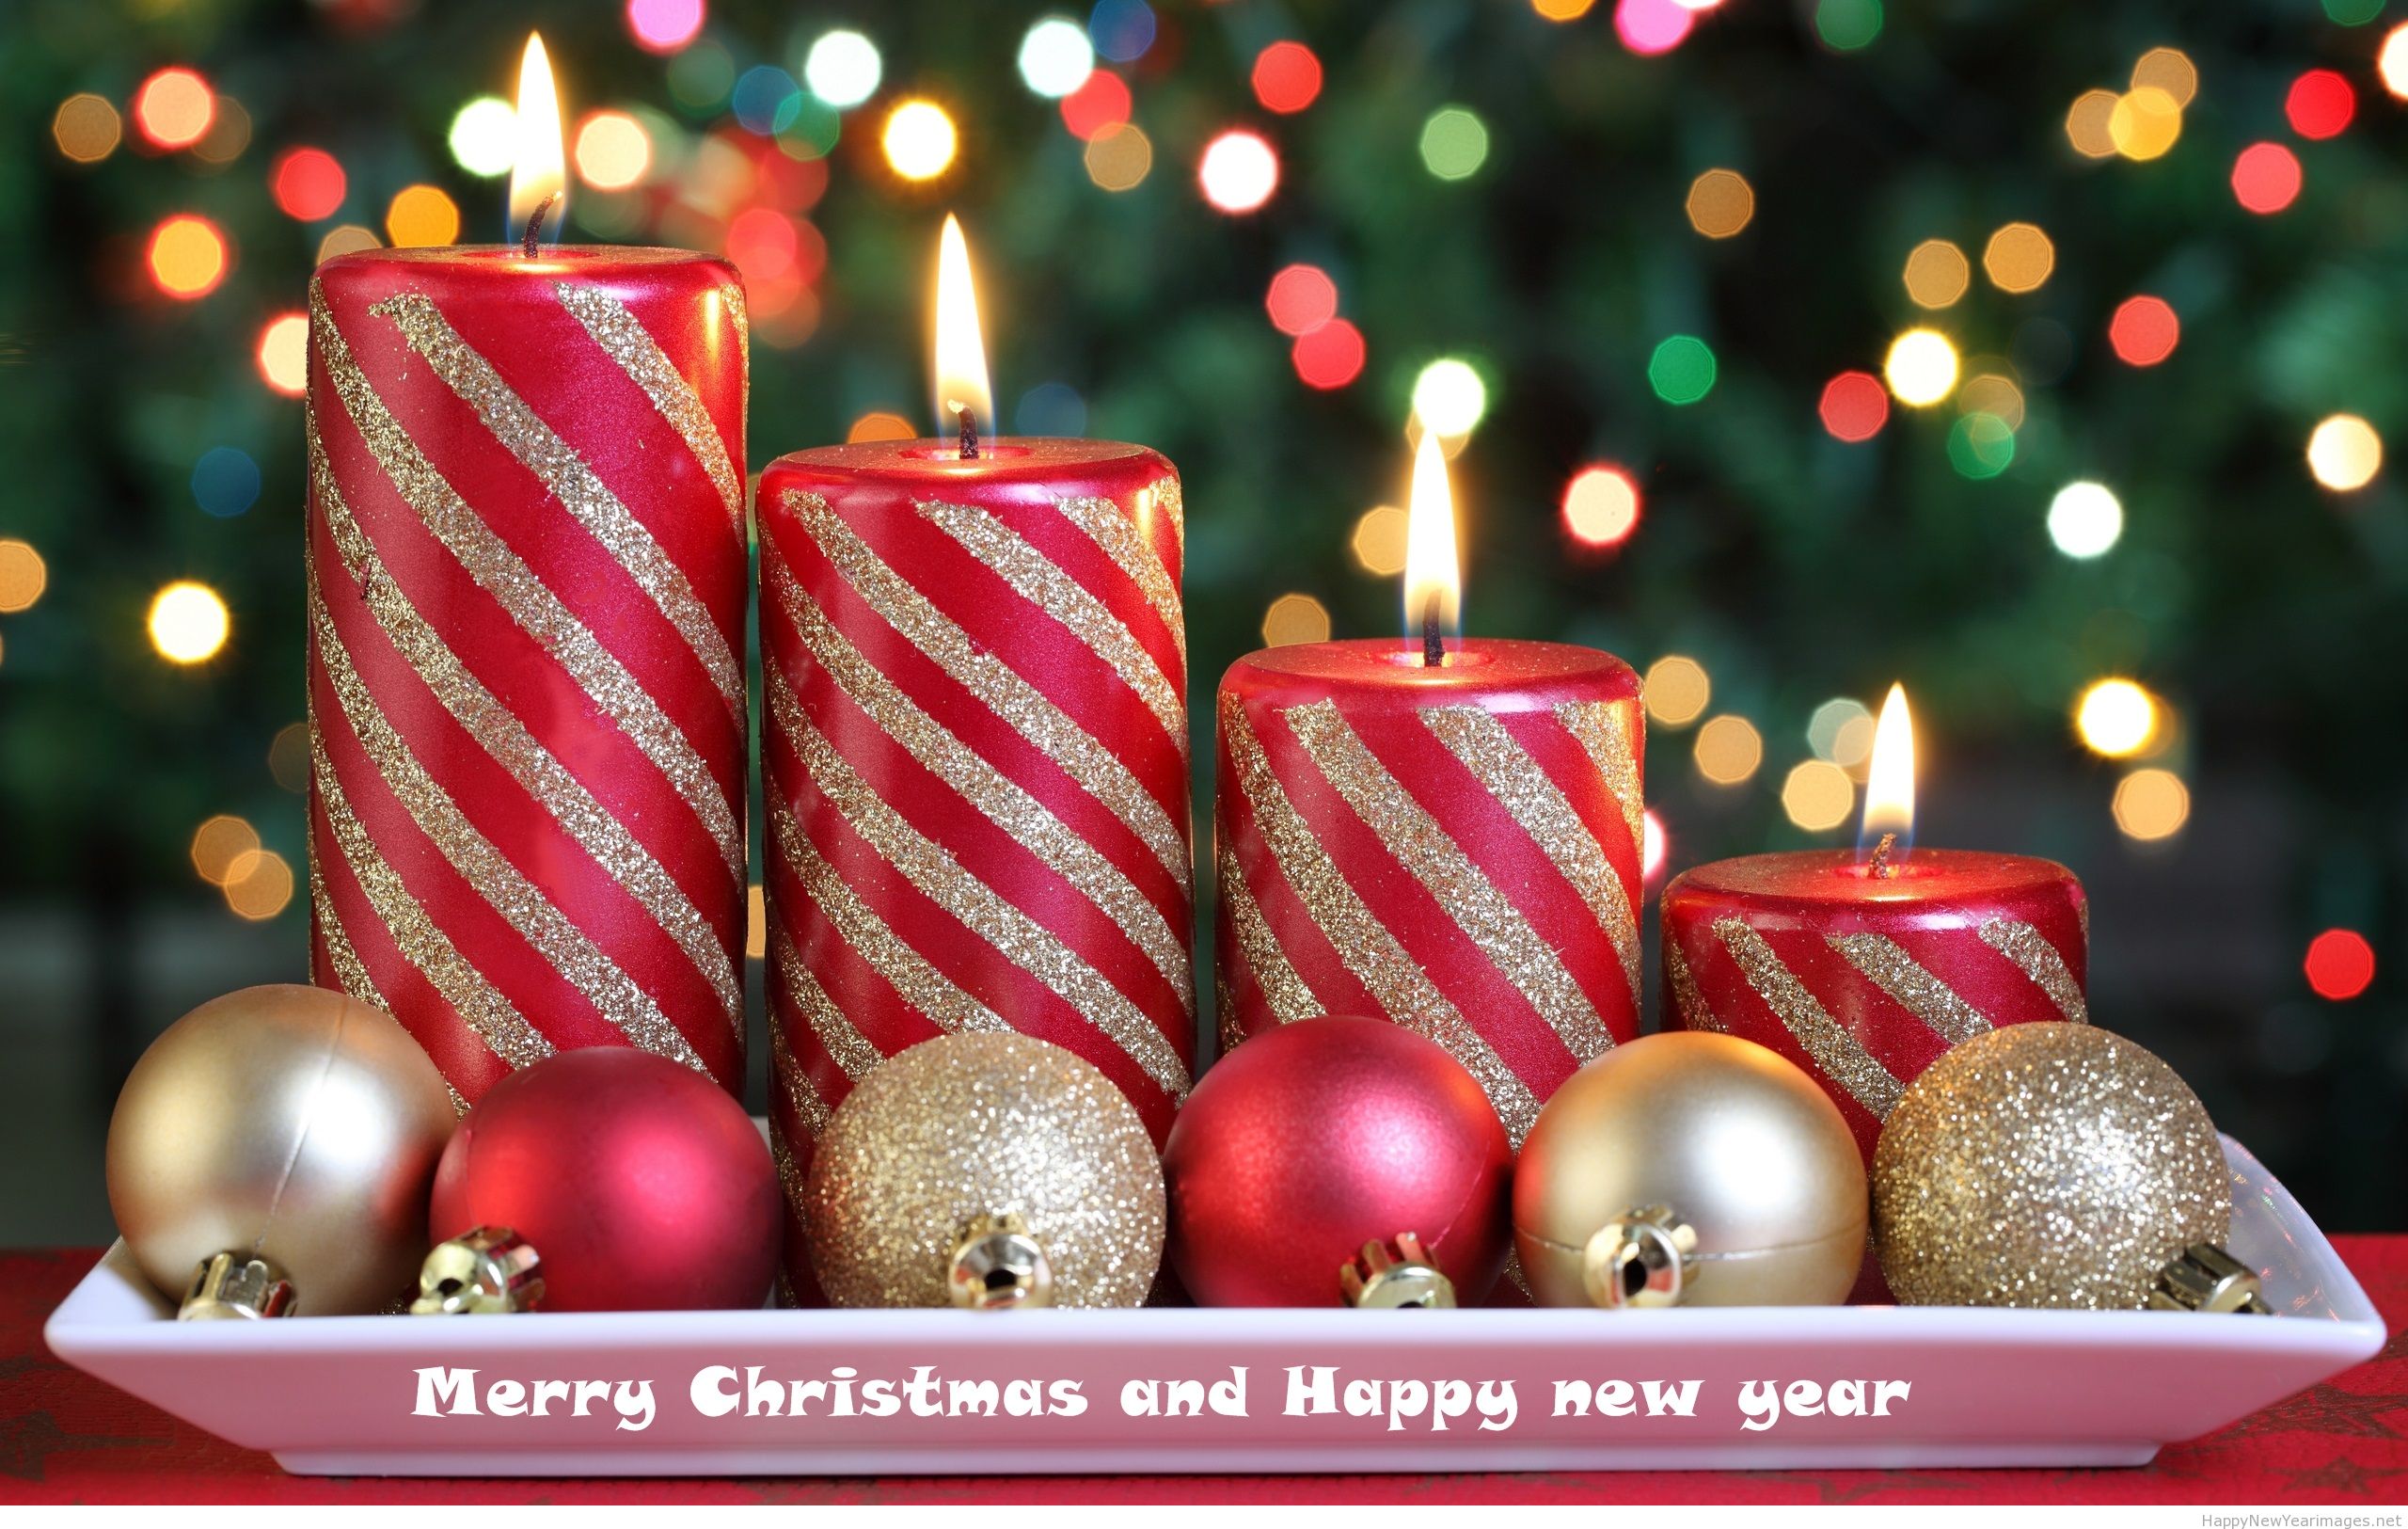 Merry-Christmas-and-happy-new-year-candle-wallpaper-2014-2015